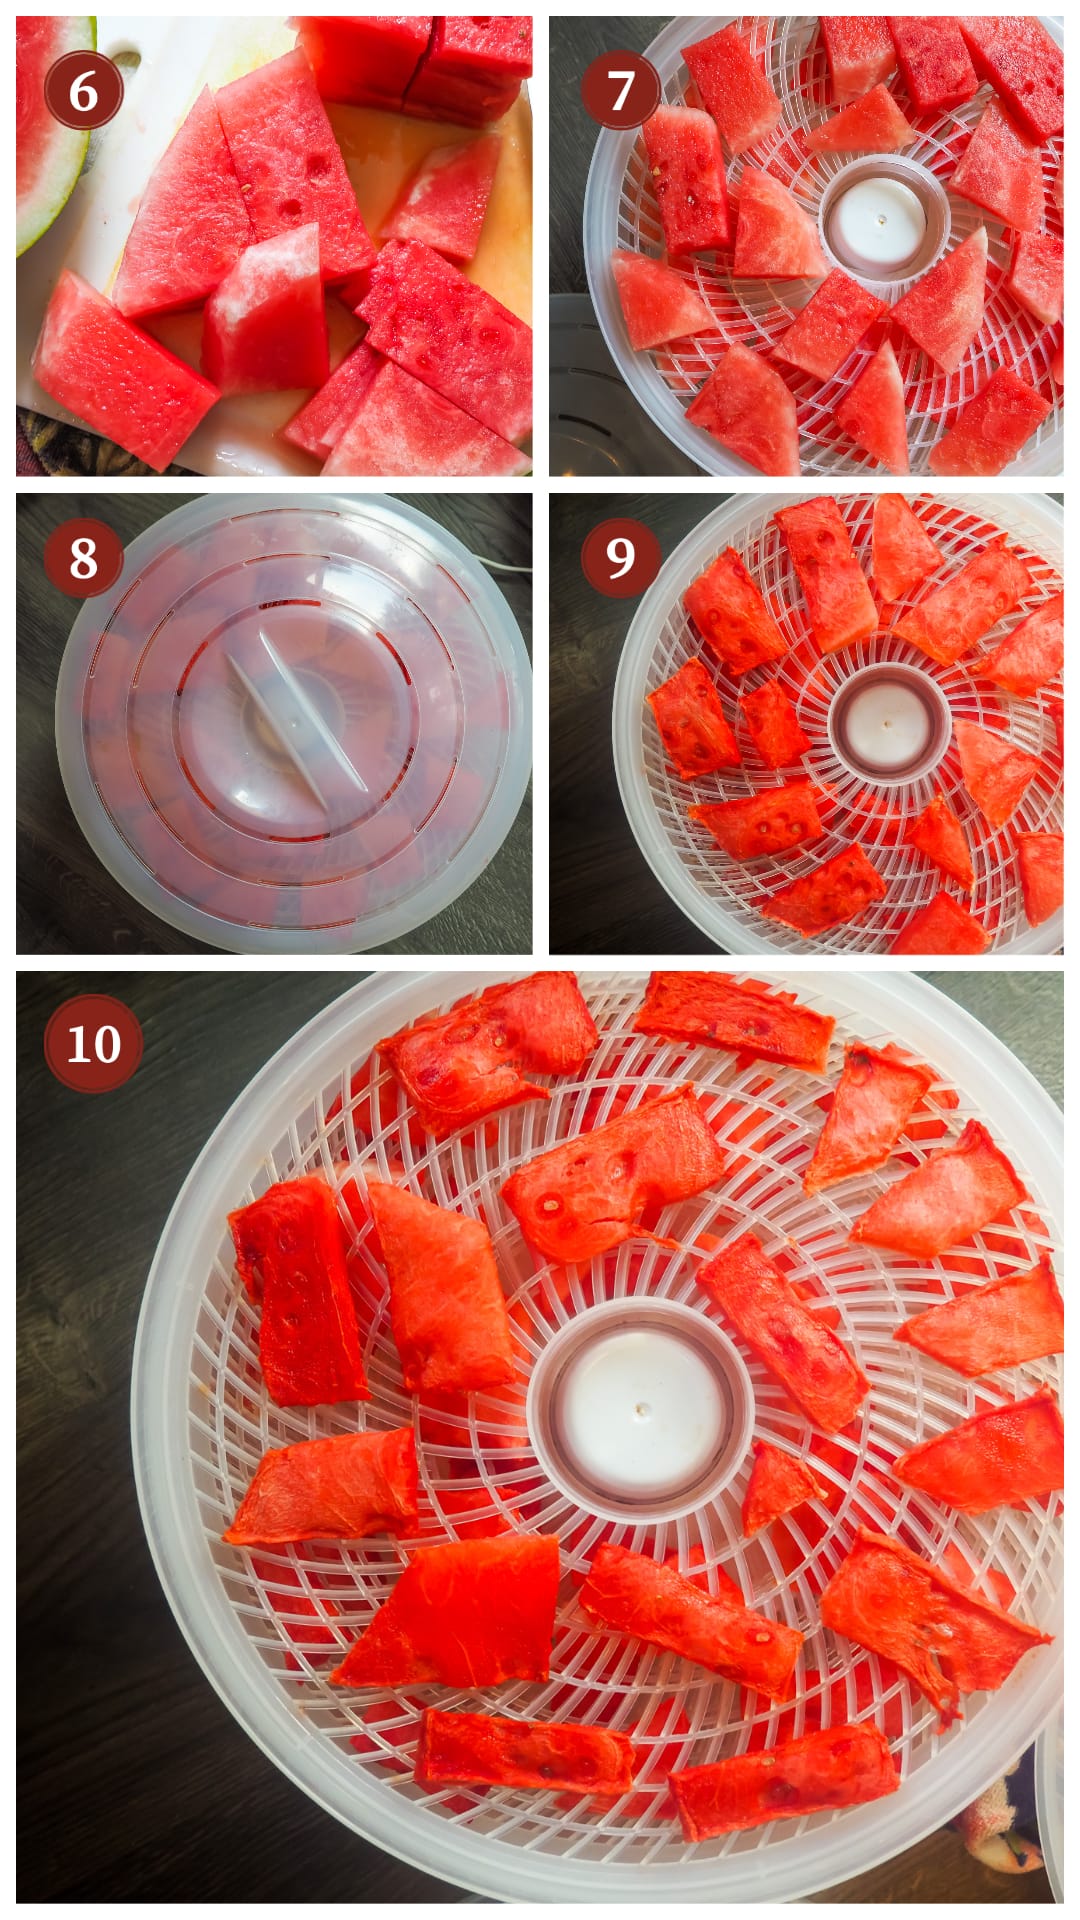 A collage of images showing the process of making dehydrated watermelon, steps 6 - 10.